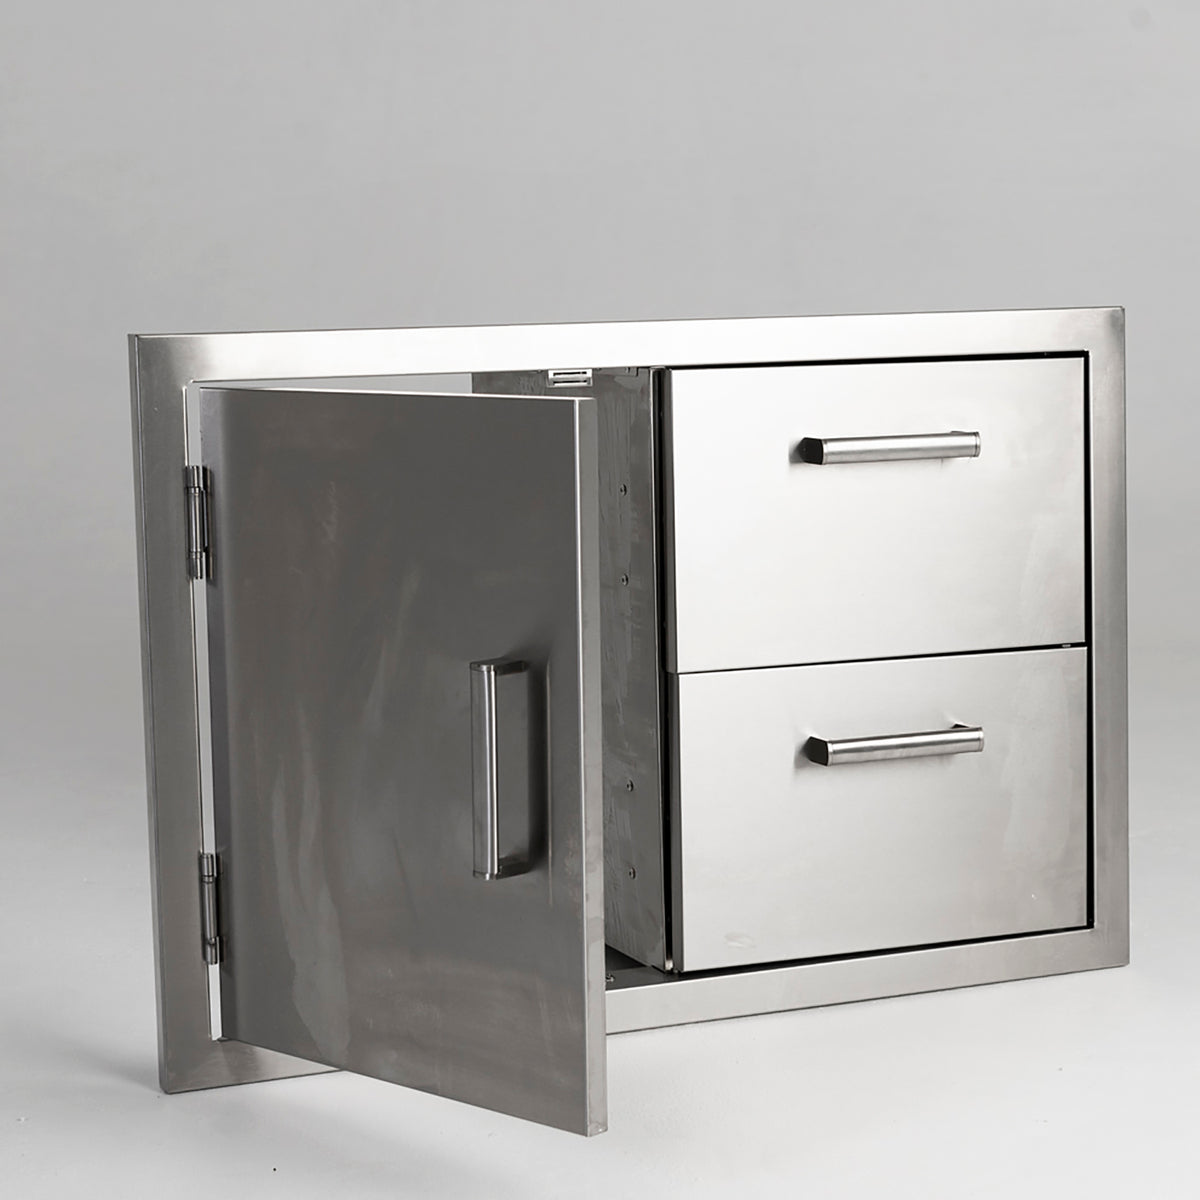 Draco Grills Stainless Steel Build-in Outdoor Kitchen Dual Drawer and Single Door Unit